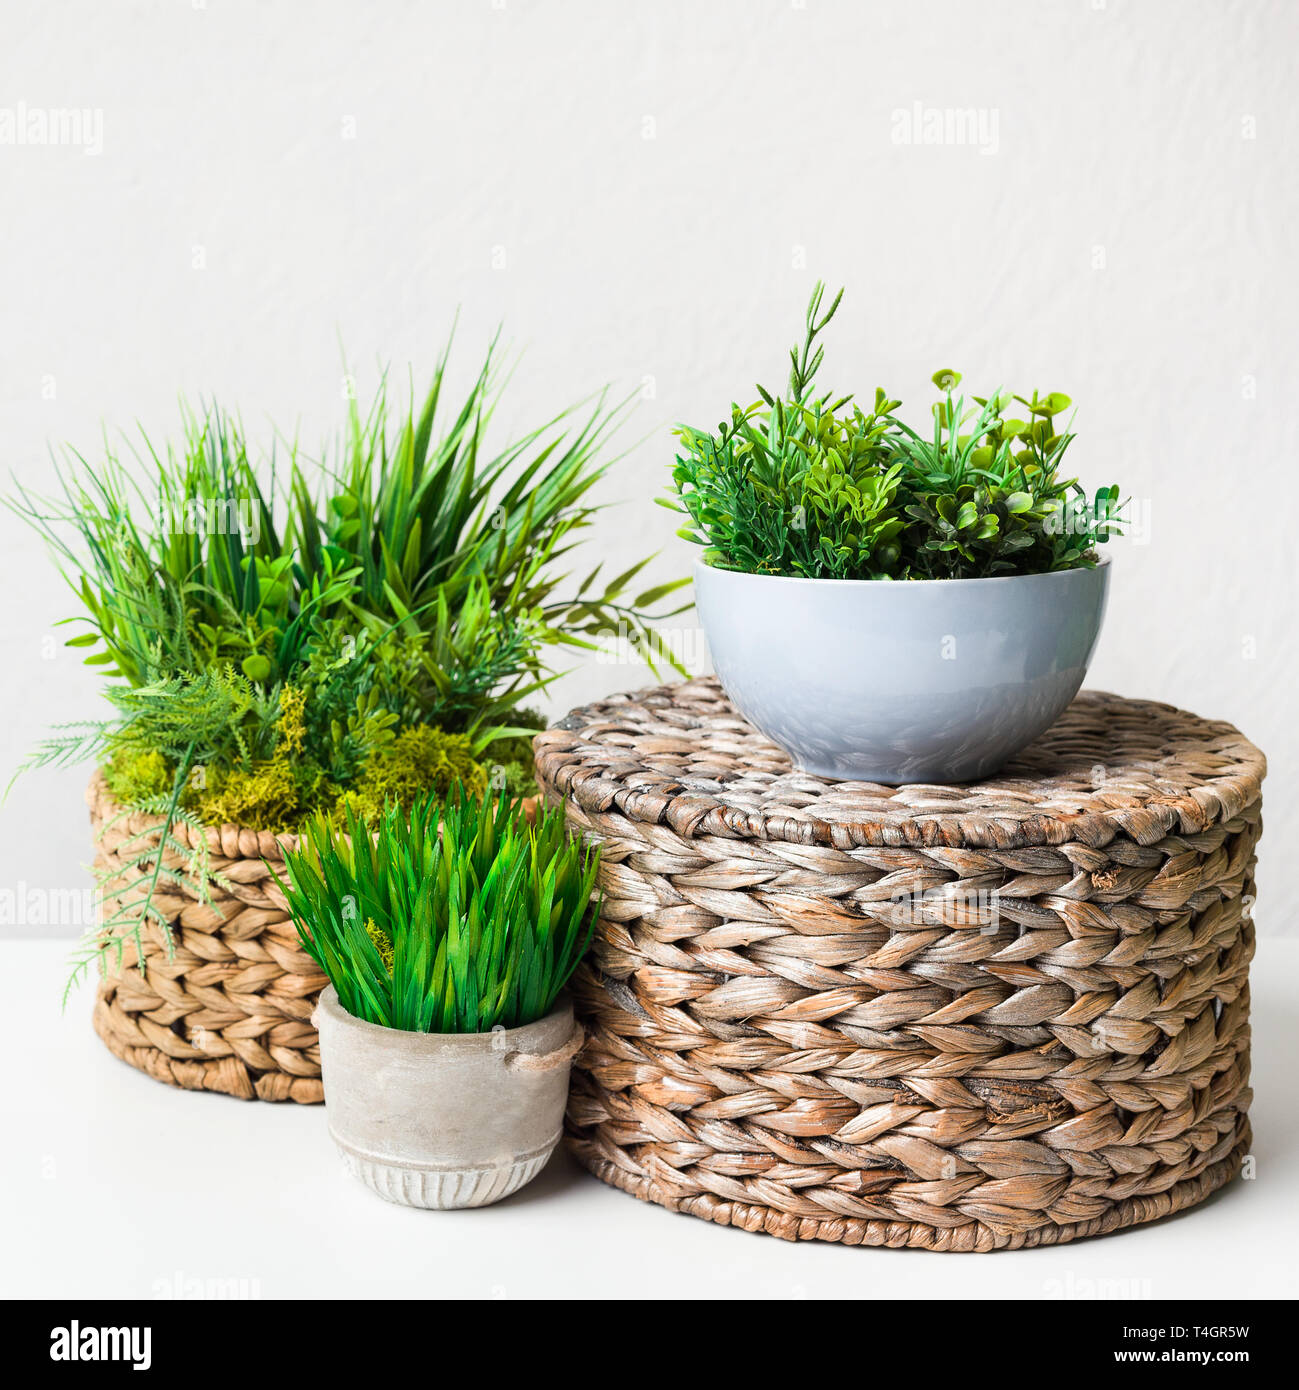 Artificial grassy plants in pots on wicker boxes over light wall, crop Stock Photo